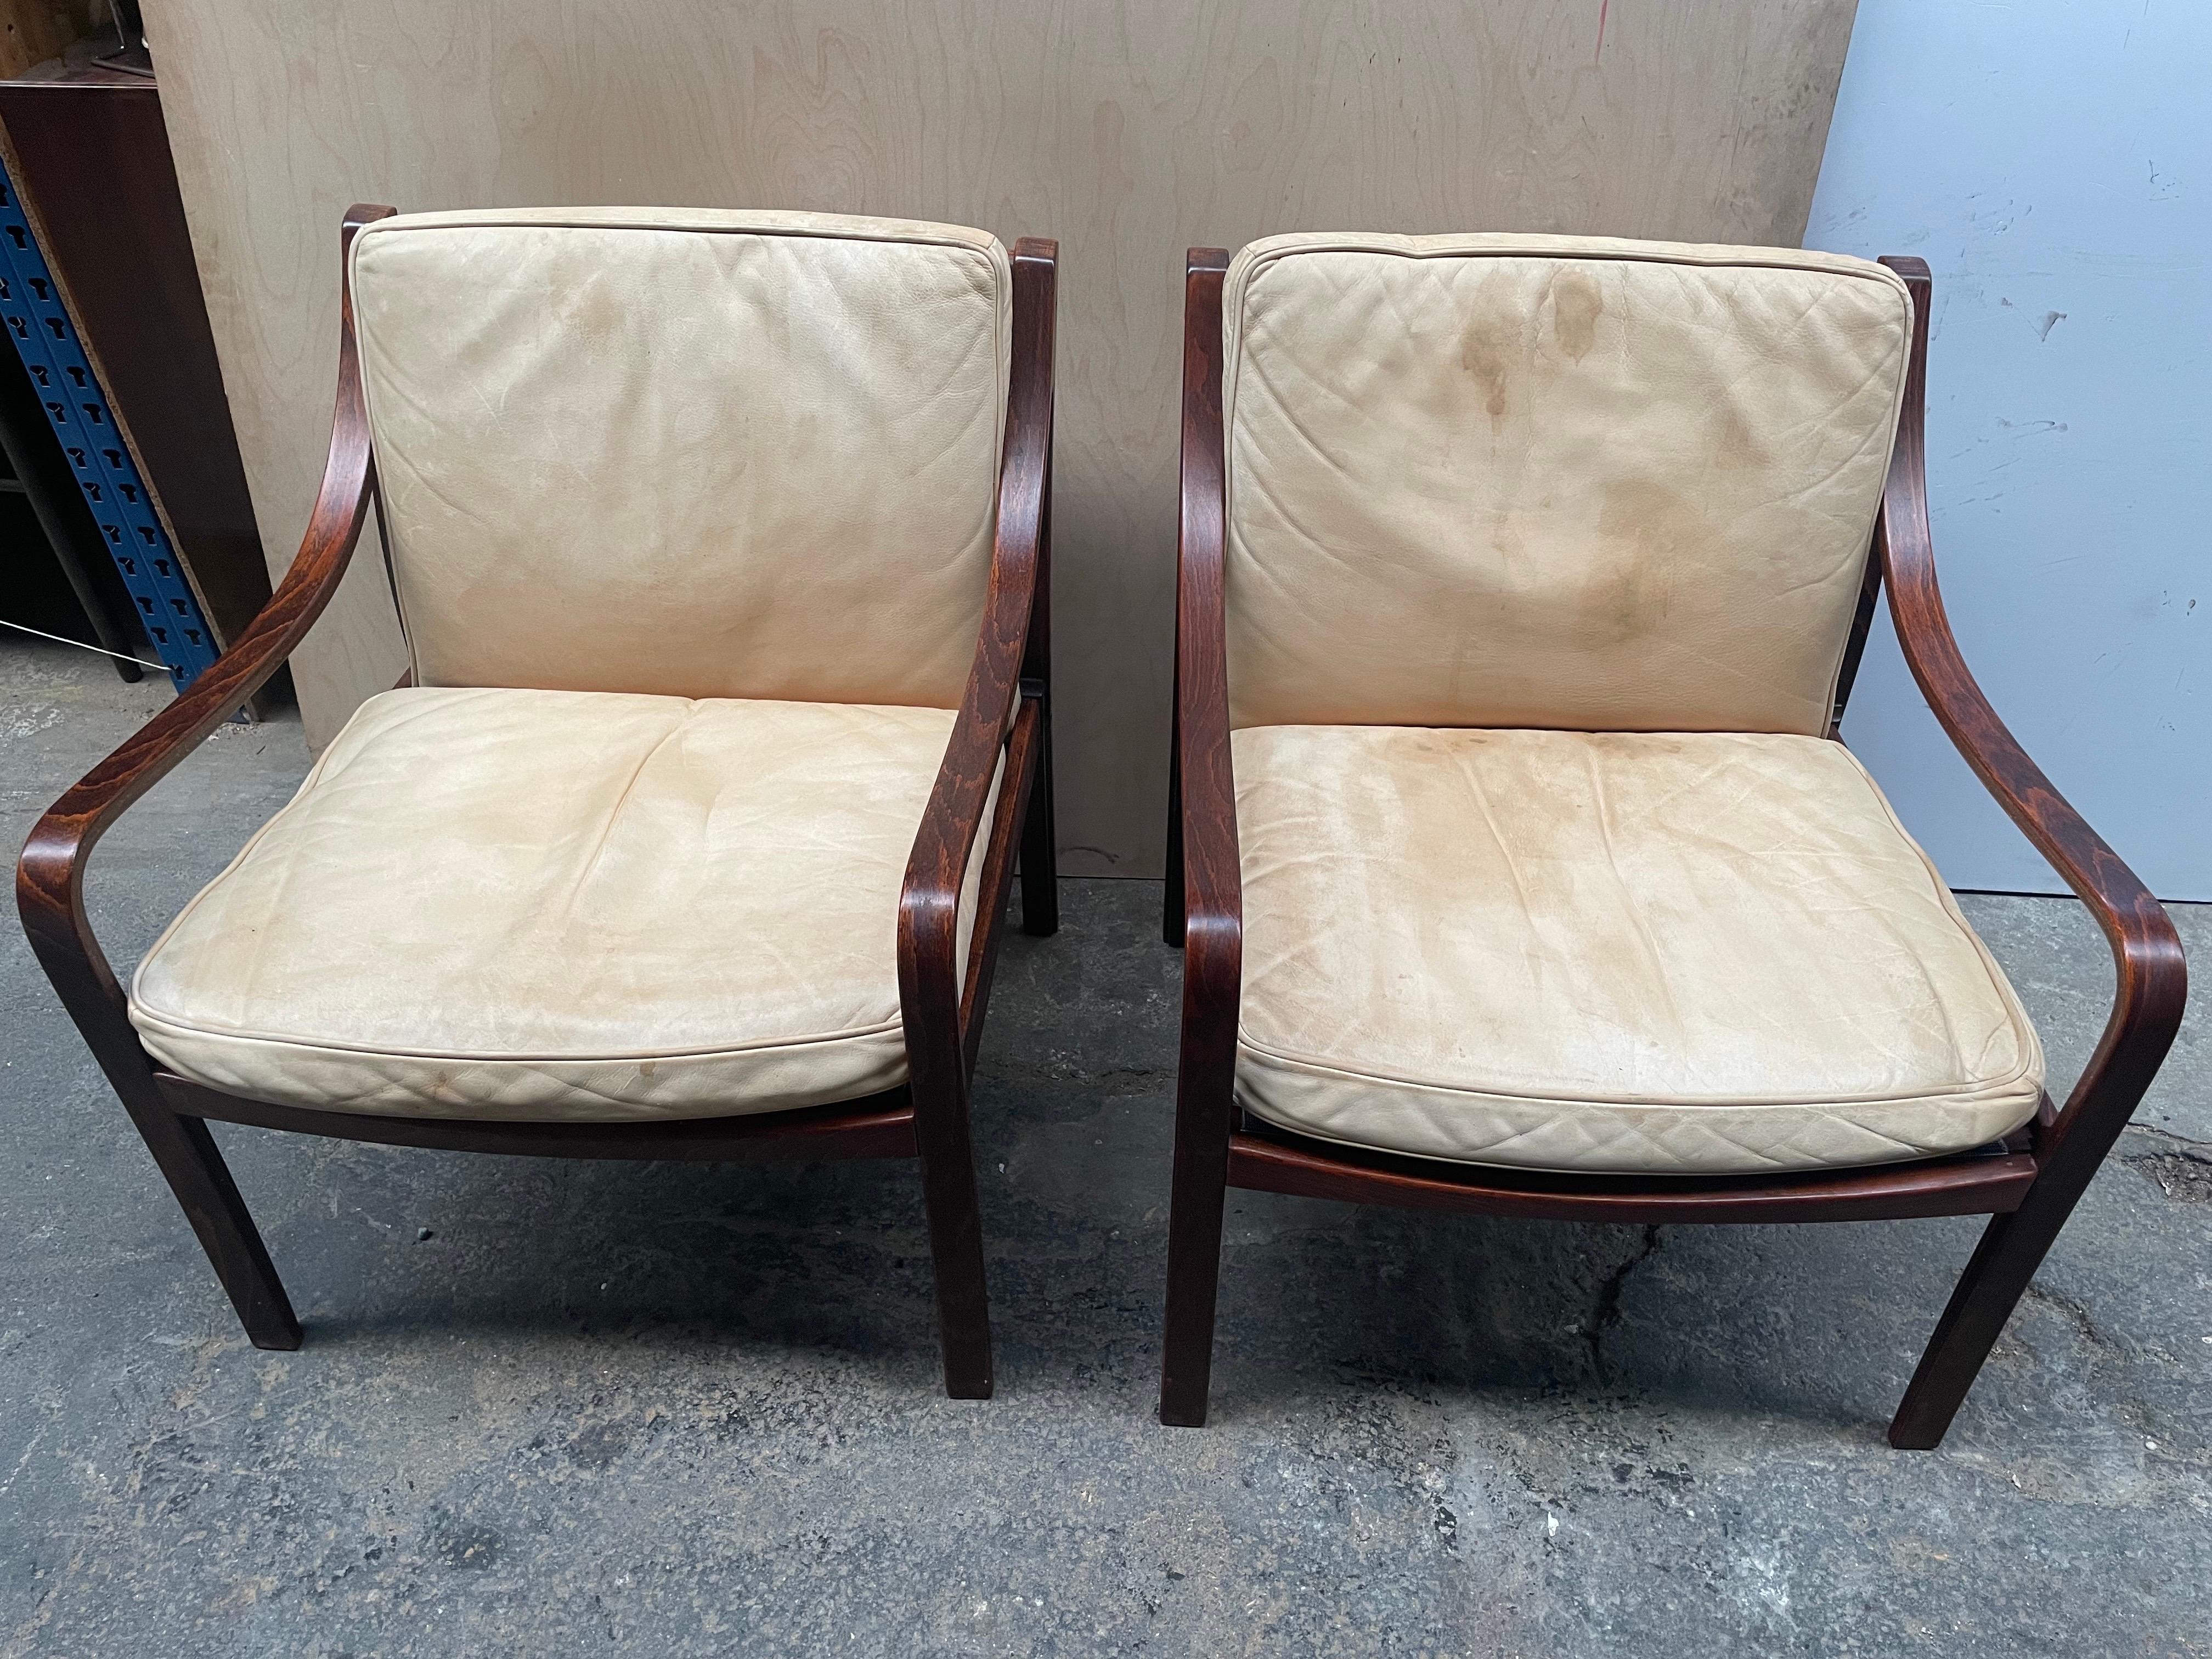 Pair of Lounge Chairs by Fredrik Kayser for Vatne Møbler, 1960s For Sale 2